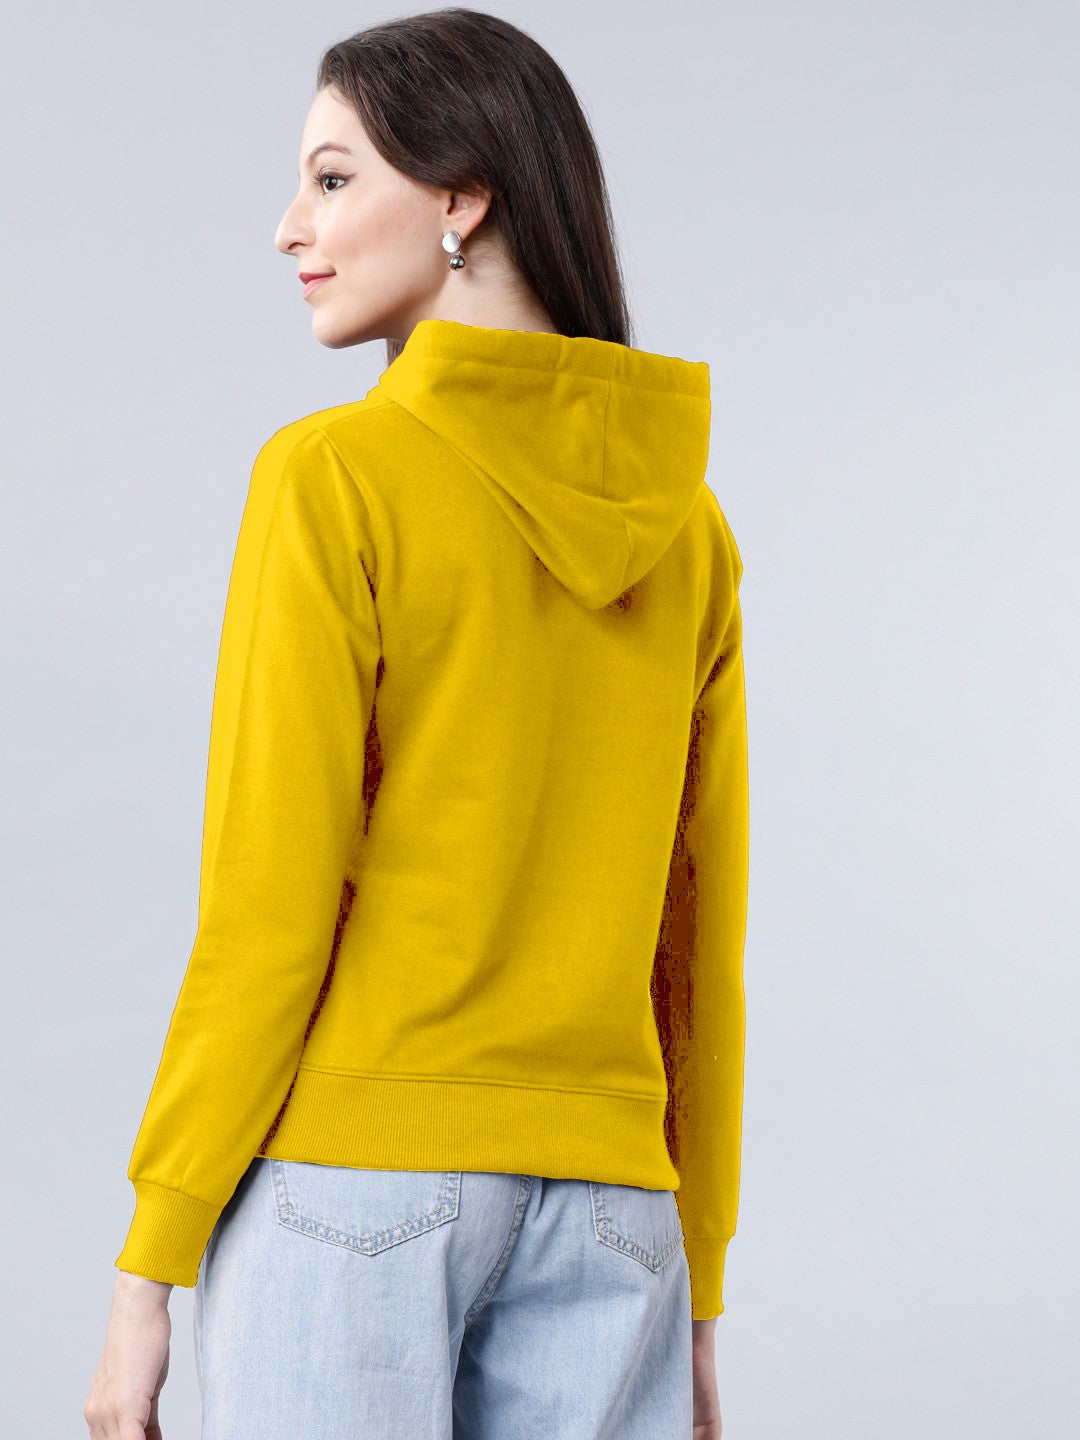 Yellow Colour High Quality Premium Hoodie For Women's